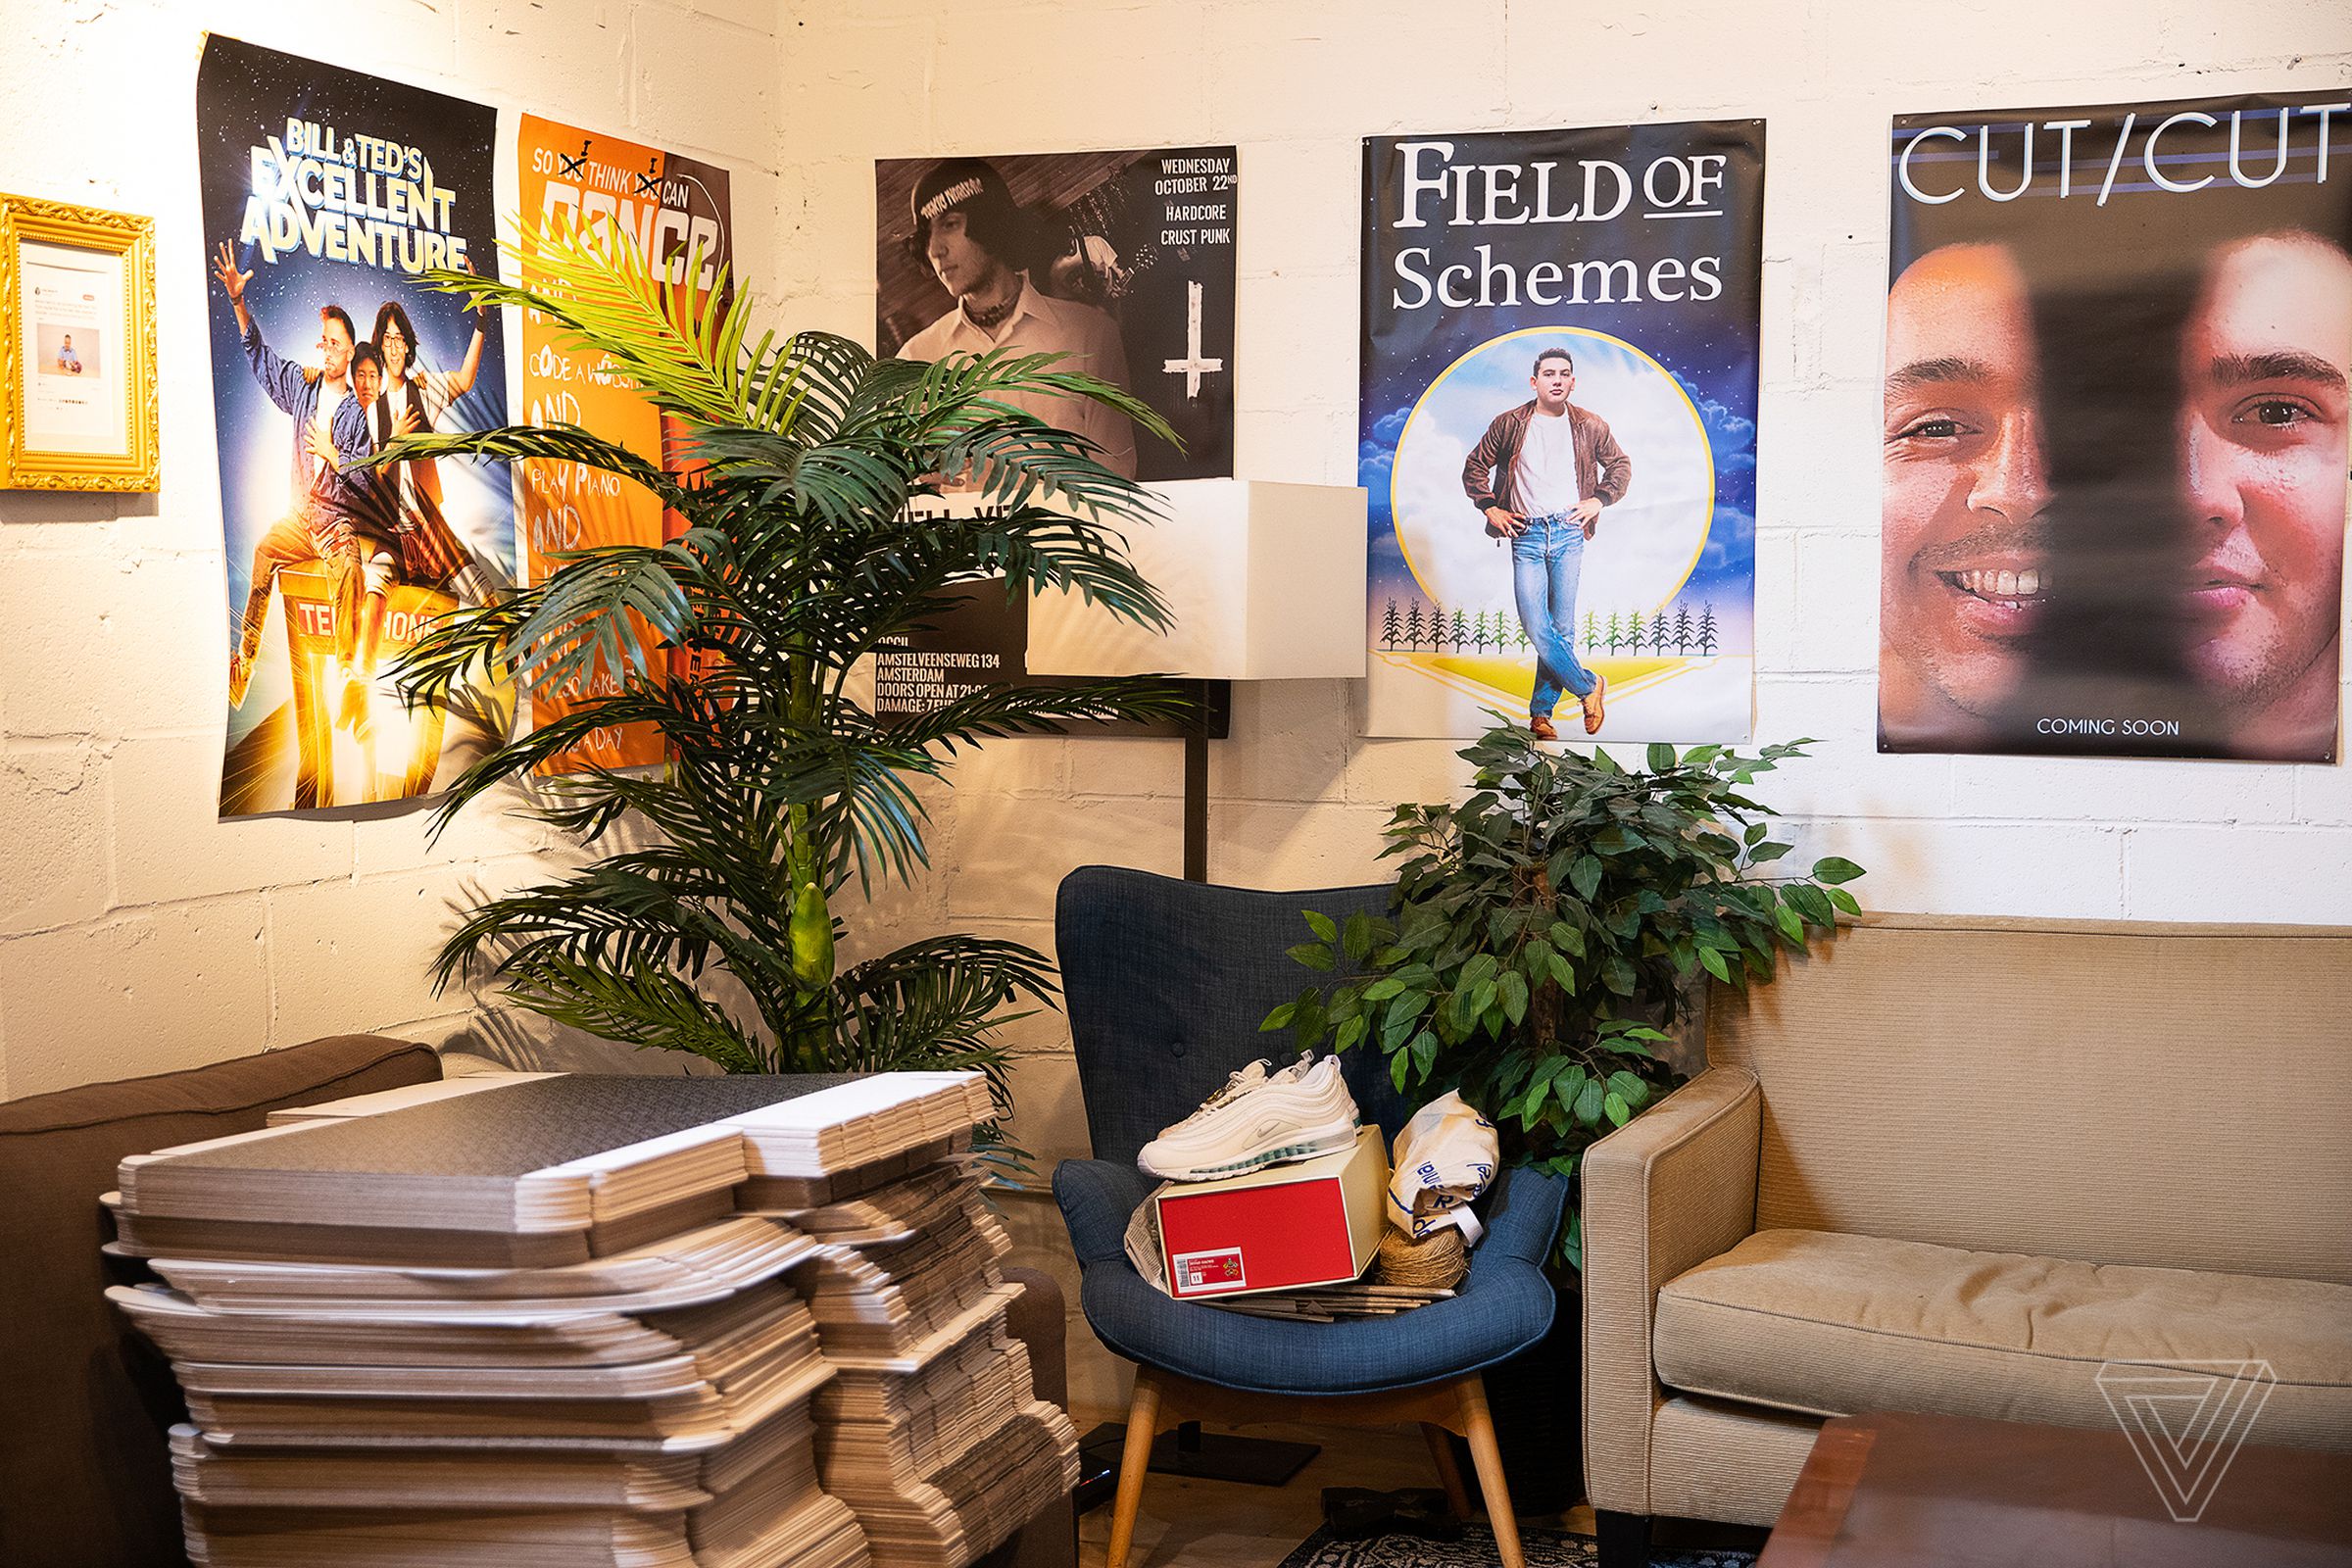 Couches and chairs are in crowded corner of a room with posters on the walls, a pair of sneakers and other things in a pile.